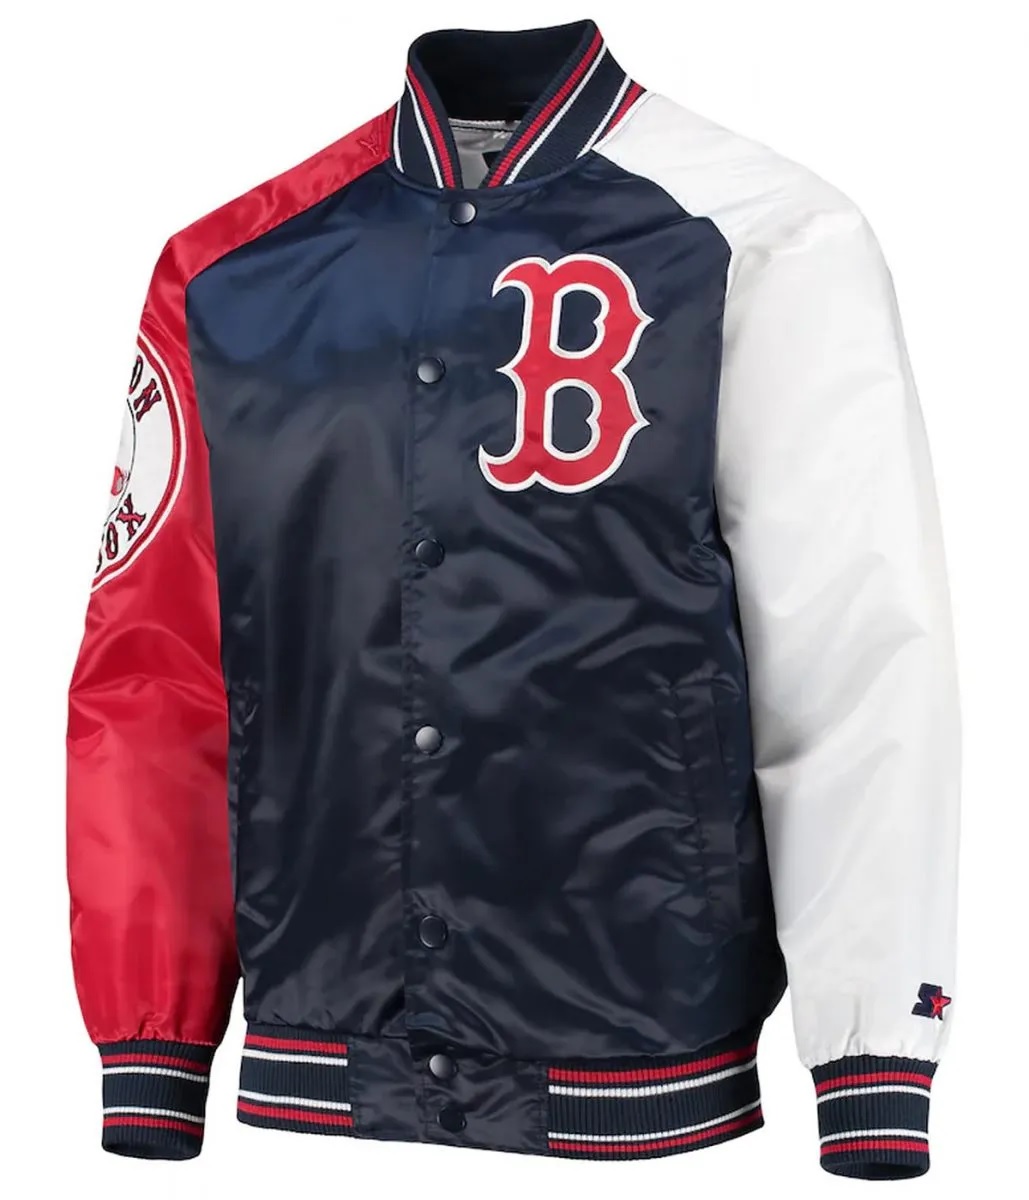 Boston Red Sox Reliever Raglan Satin Blue and Red Jacket